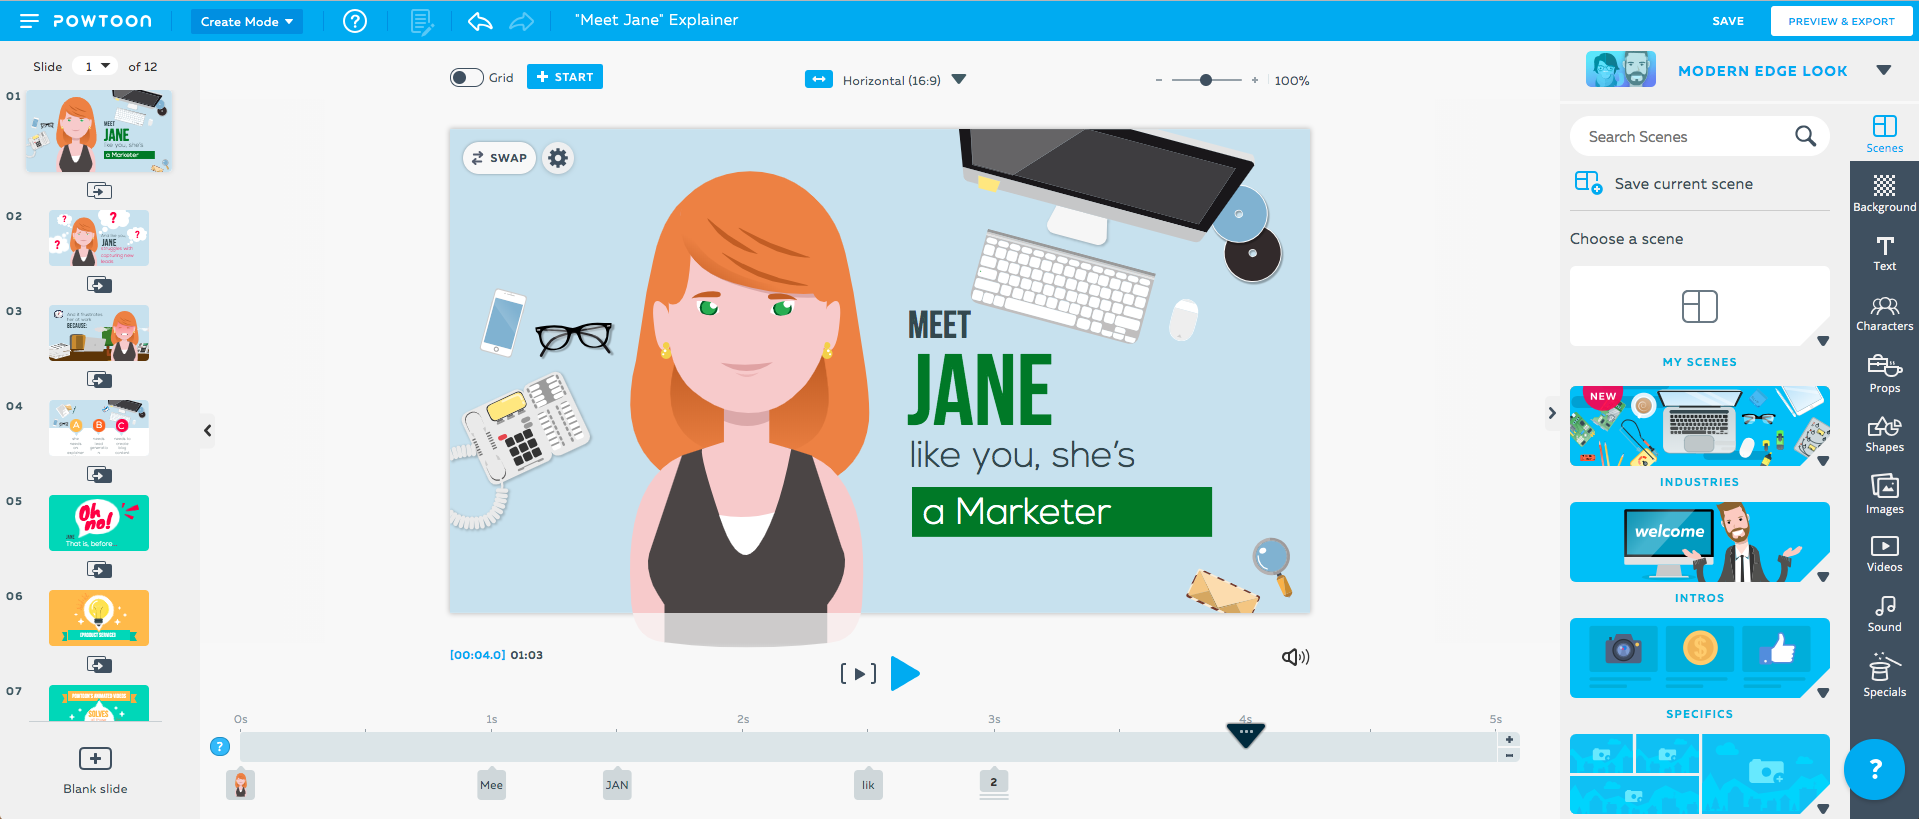 12 Best Video Marketing Tools You Need in 2021